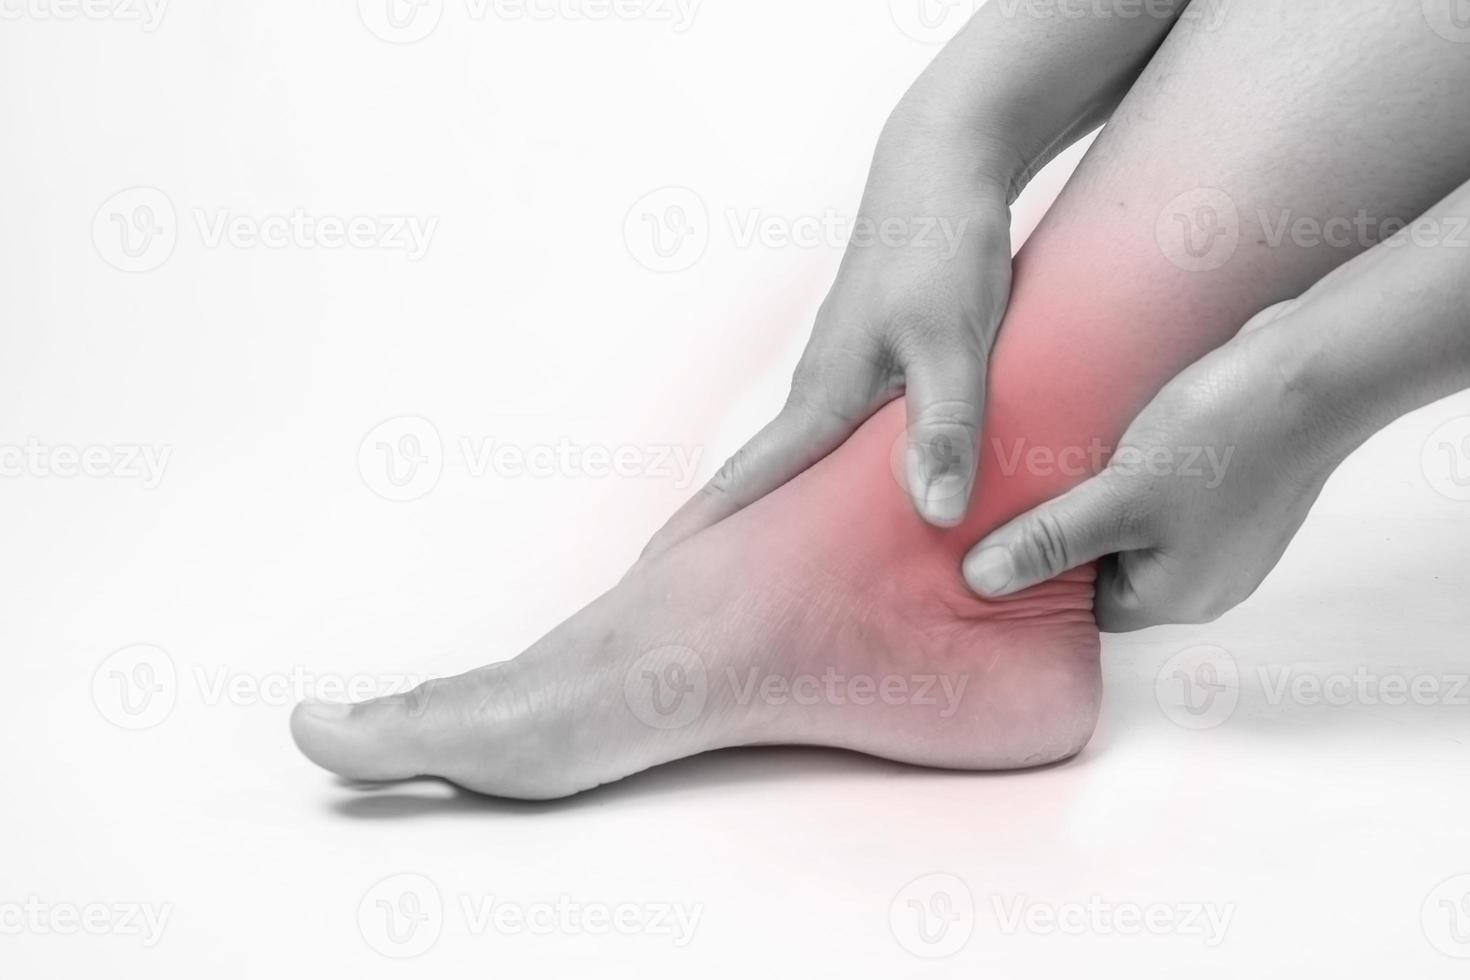 ankle injury in humans .ankle pain,joint pains people medical, mono tone highlight at ankle photo